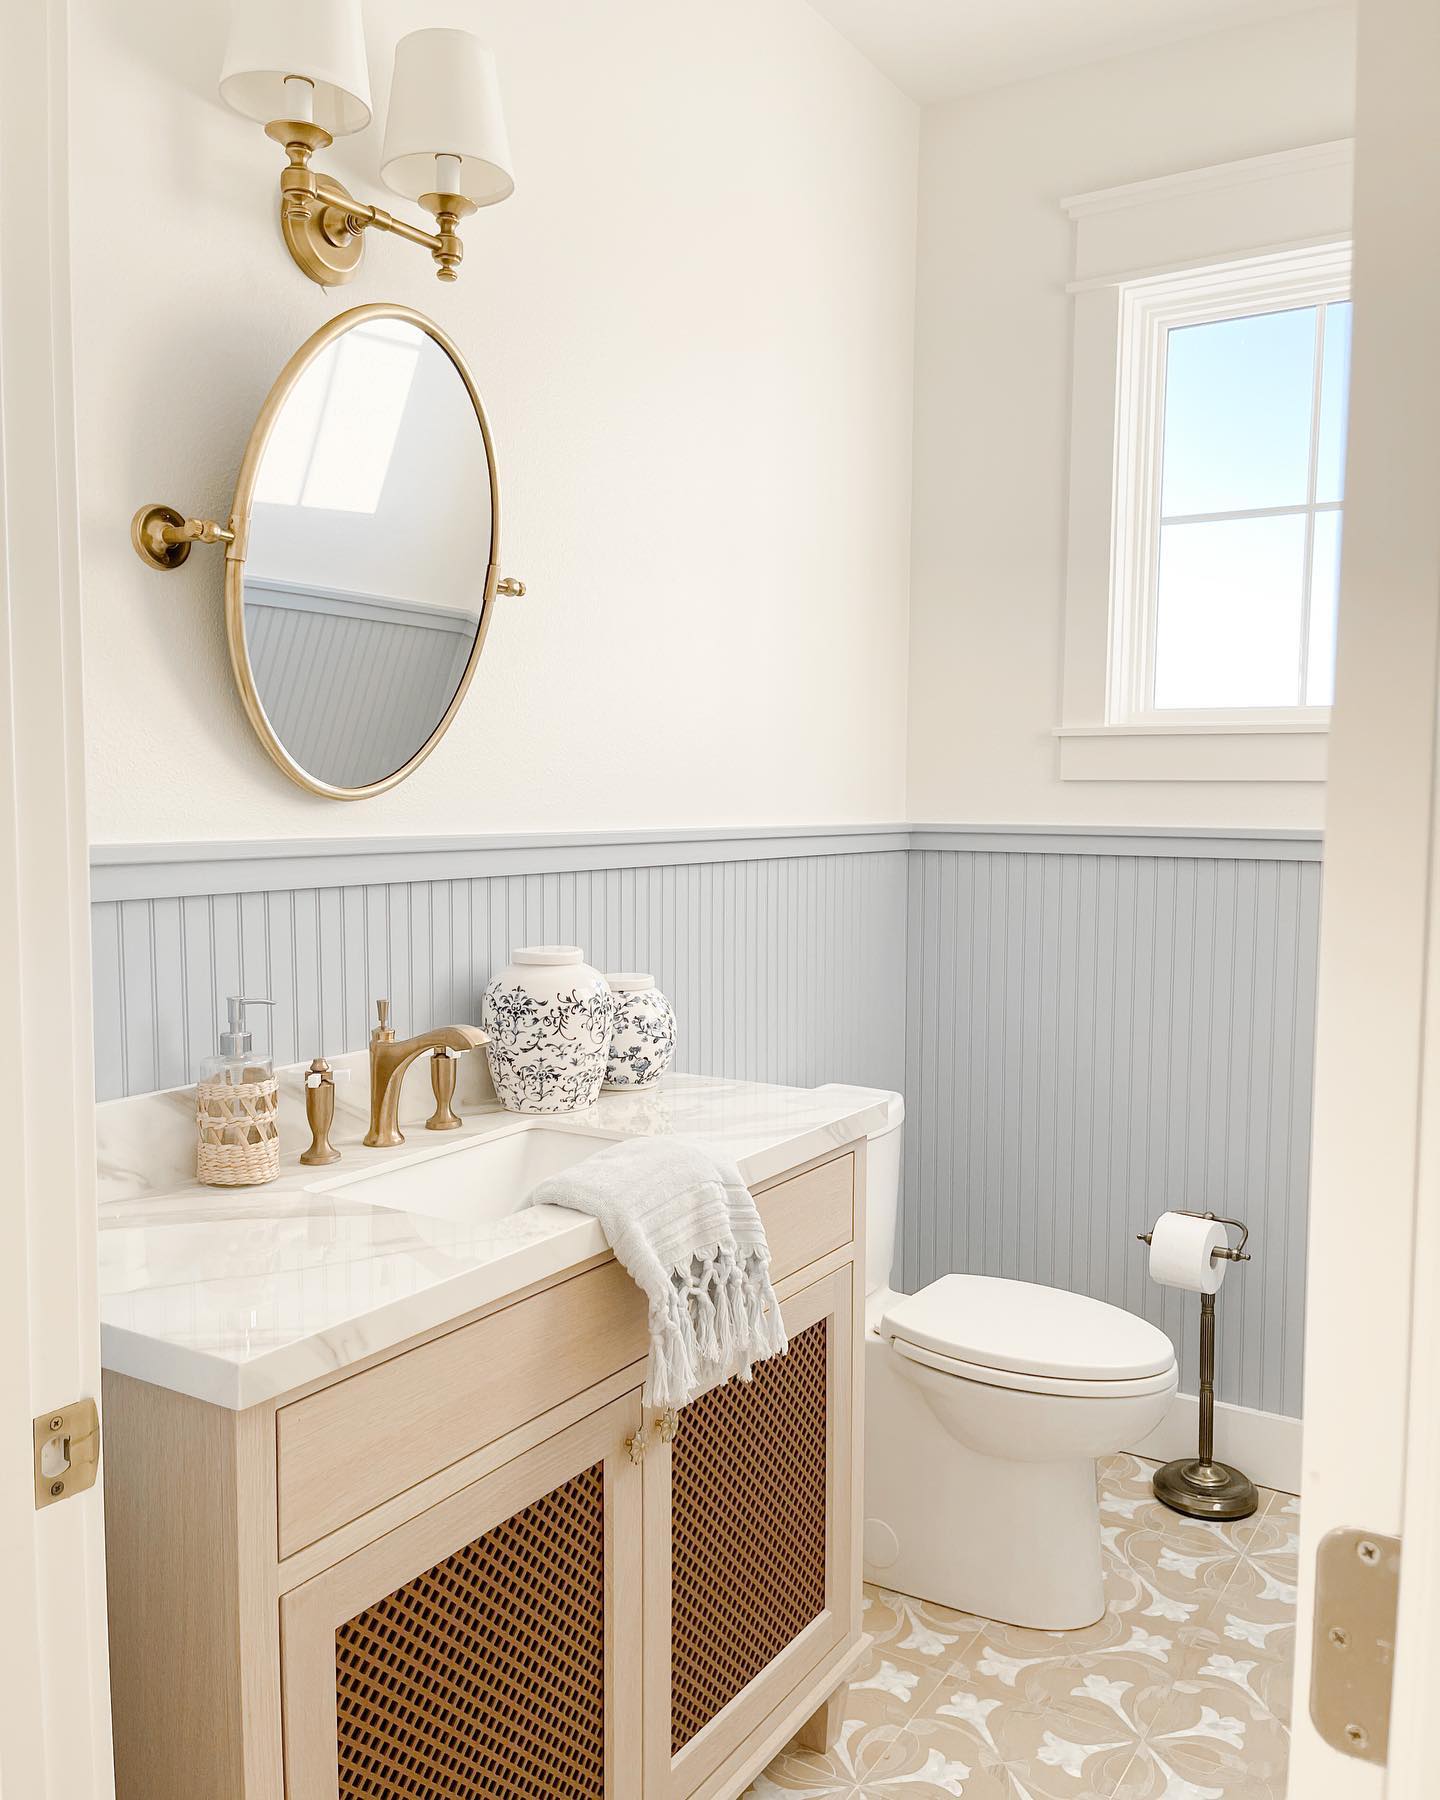 Powder room sneak peek!  This is one of my favorite rooms in the new house. My vision board pretty much came to life 🙌🏻. The only thing missing is the wallpaper above the beadboard…hoping that happens this year! Let me know what you think! 

To shop this image, go to the link in my bio and select “shop my Instagram.” You can also find me on the @shop.ltk app! #liketkit #LTKRefresh #LTKhome https://liketk.it/3wM32